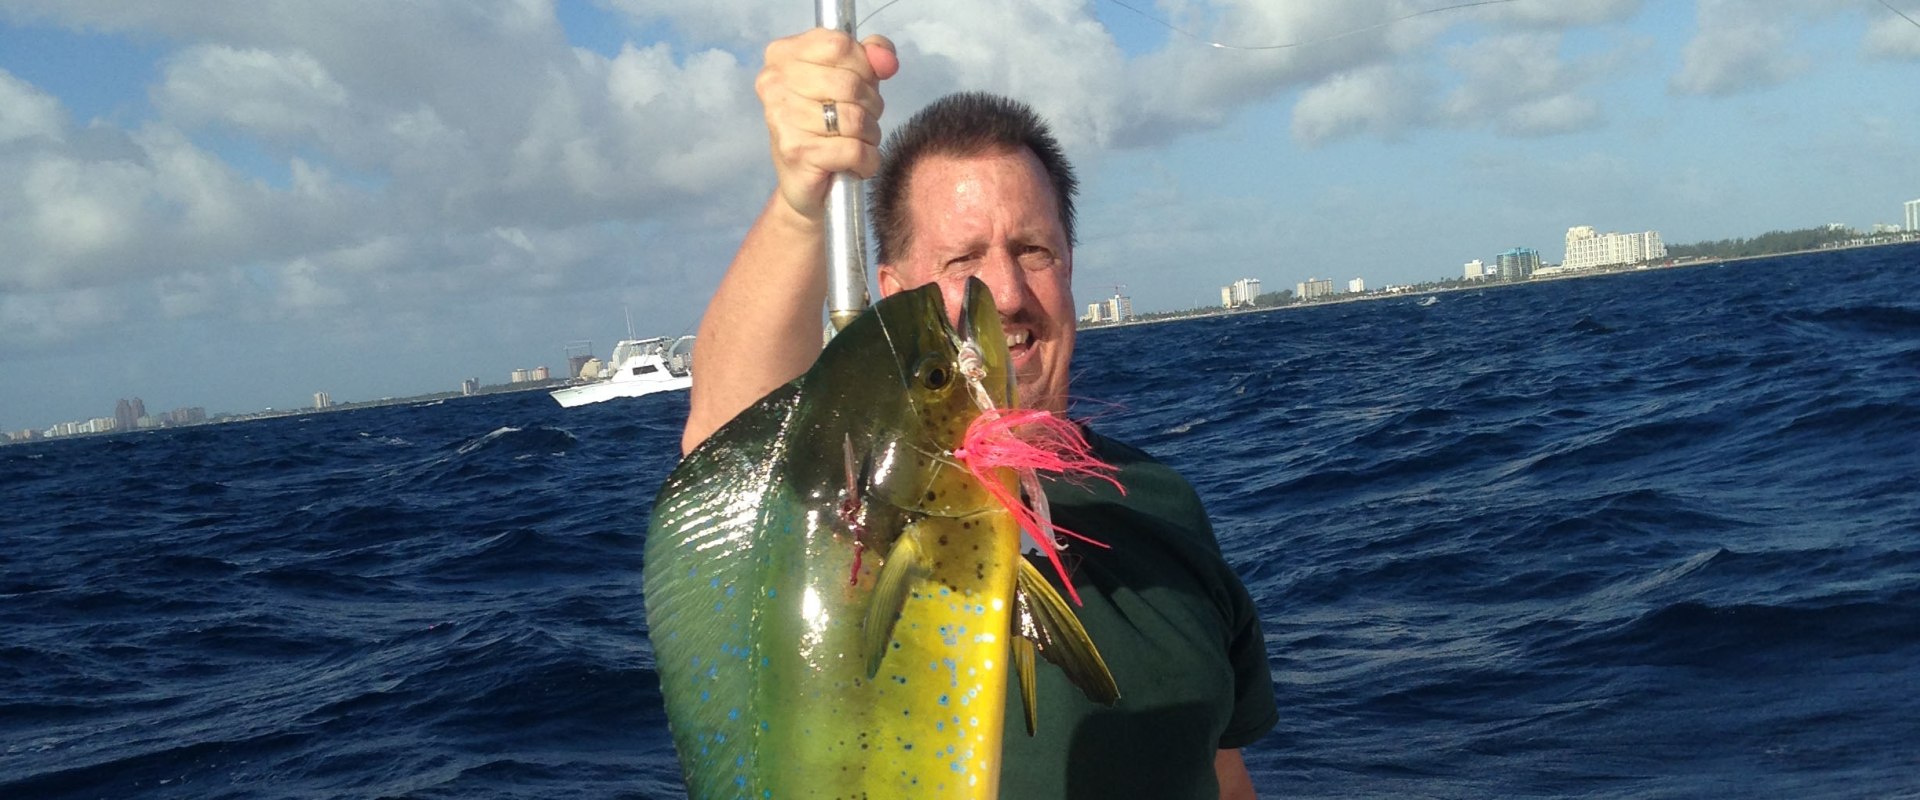 What do you do with fish caught on a charter?